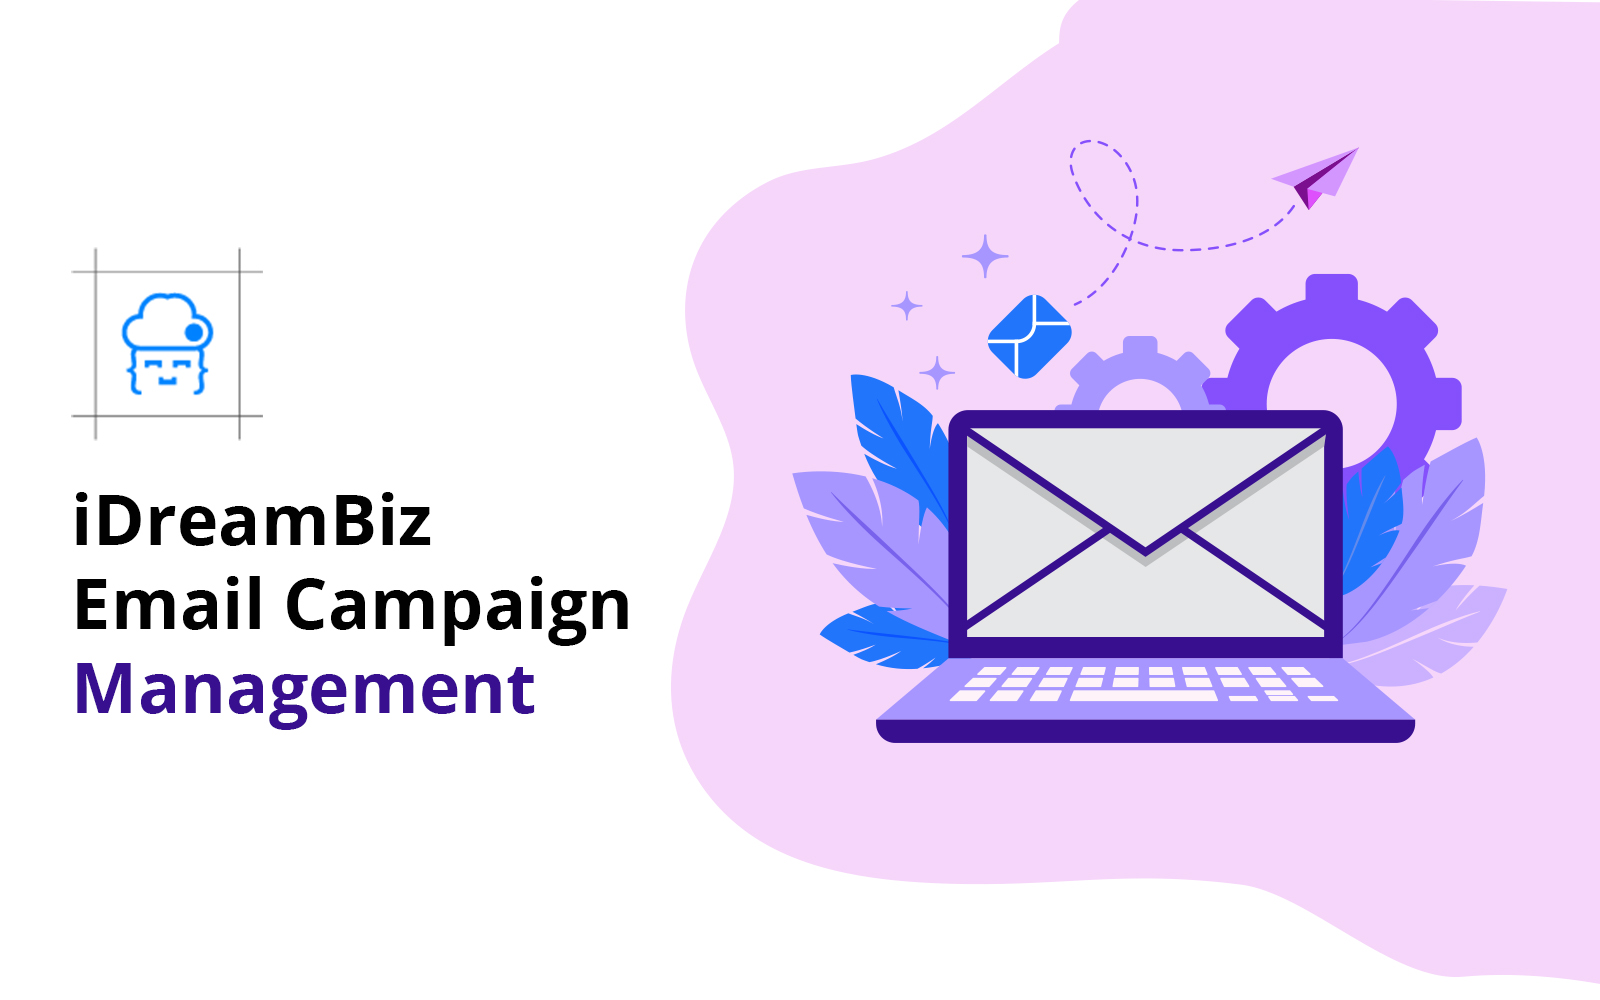 iDreamBiz Email Campaign Management Services